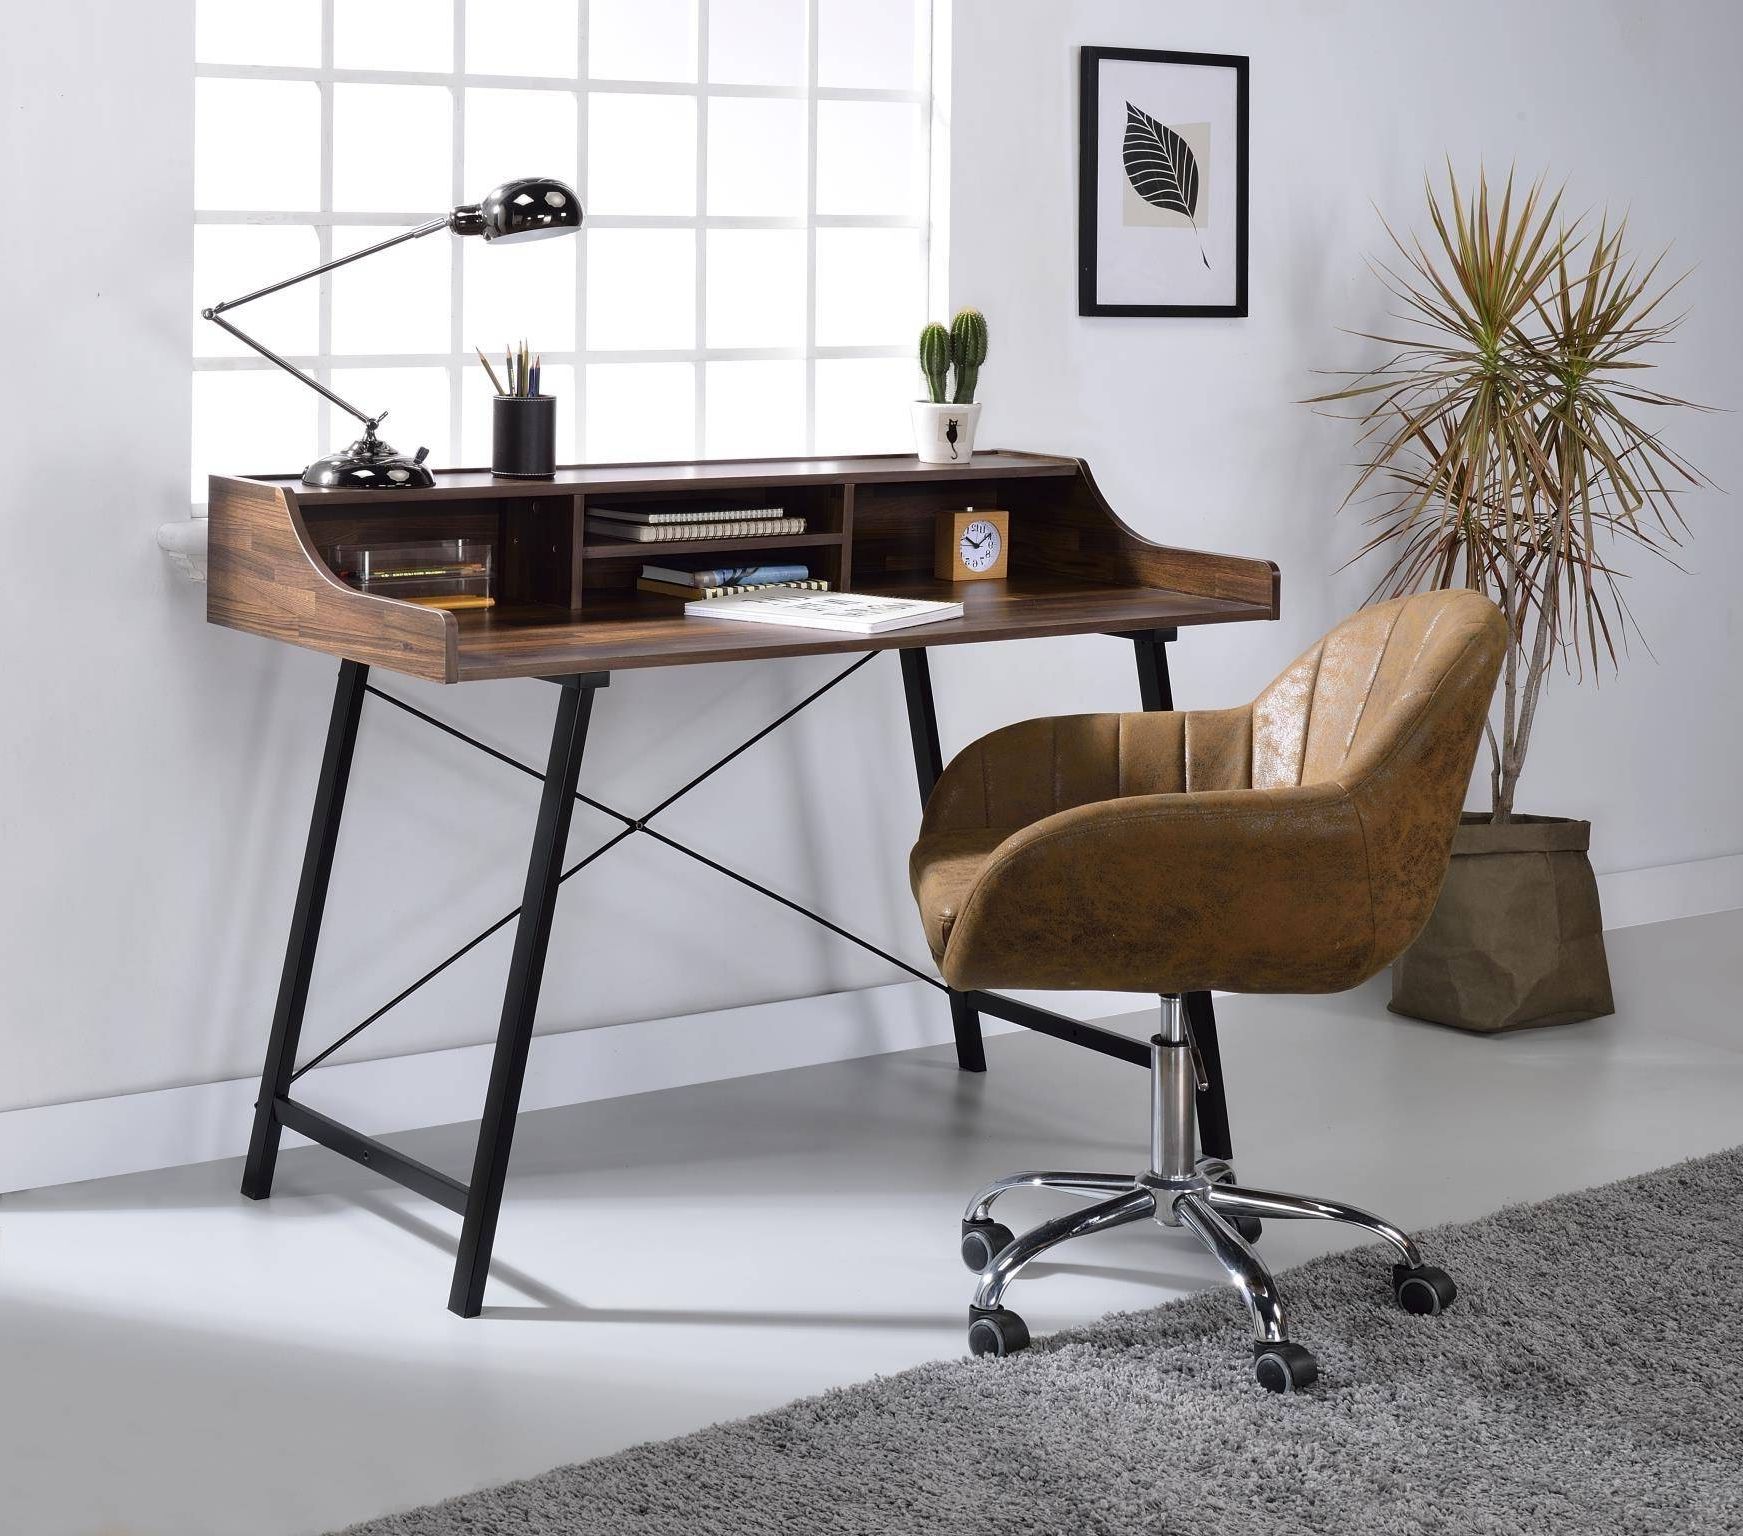 Newest Home Office Writing Desk Walnut & Black Sange 92680 Acme Contemporary Intended For Black Glass And Walnut Wood Office Desks (View 9 of 15)